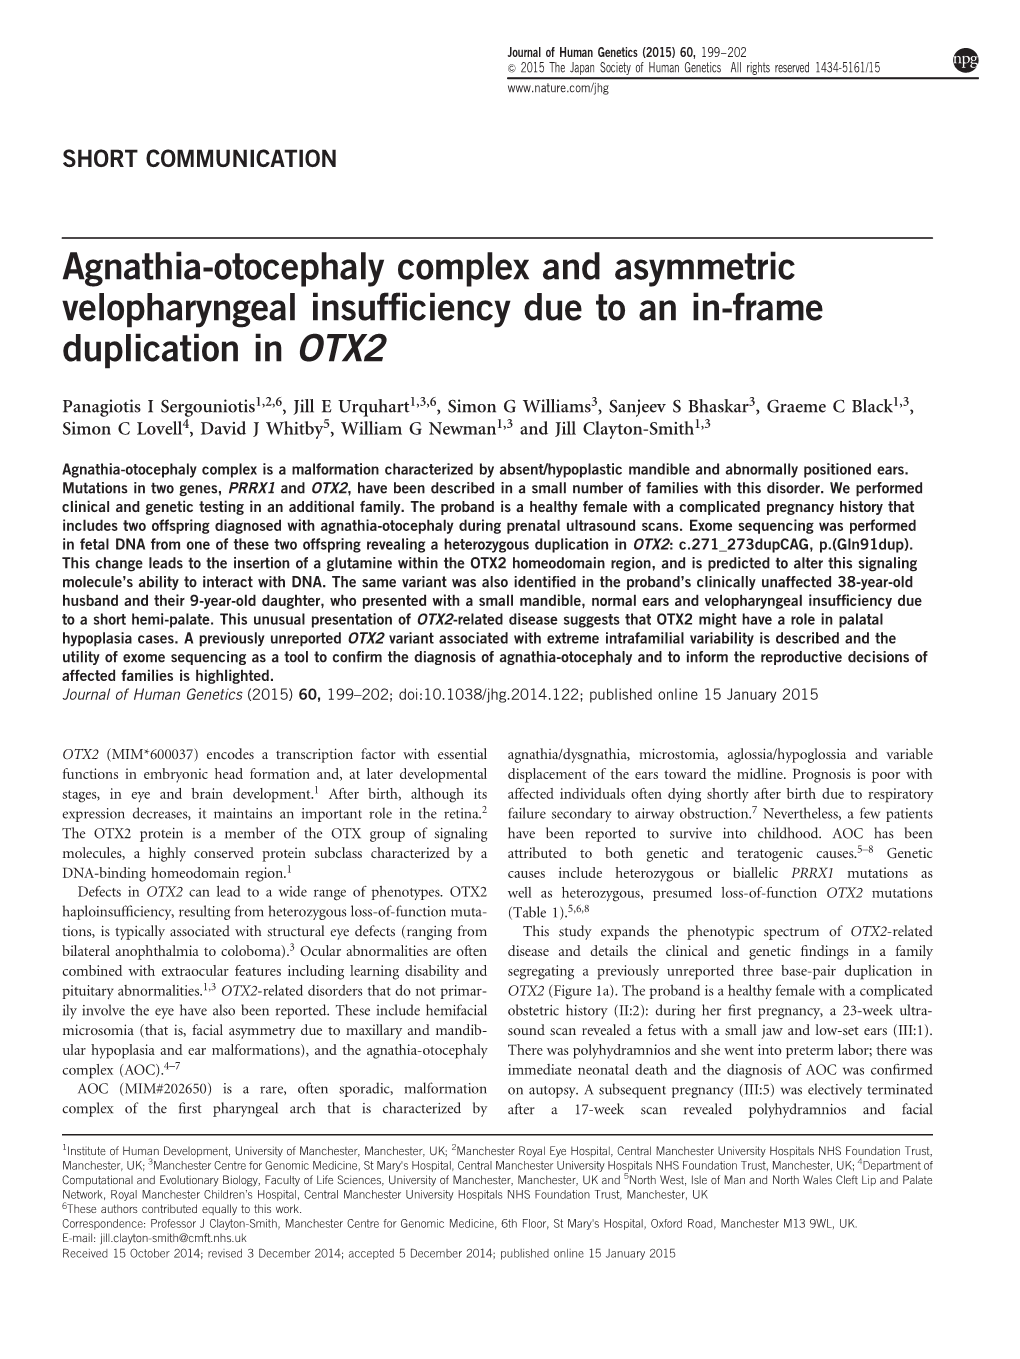 Agnathia-Otocephaly Complex and Asymmetric Velopharyngeal Insufﬁciency Due to an In-Frame Duplication in OTX2